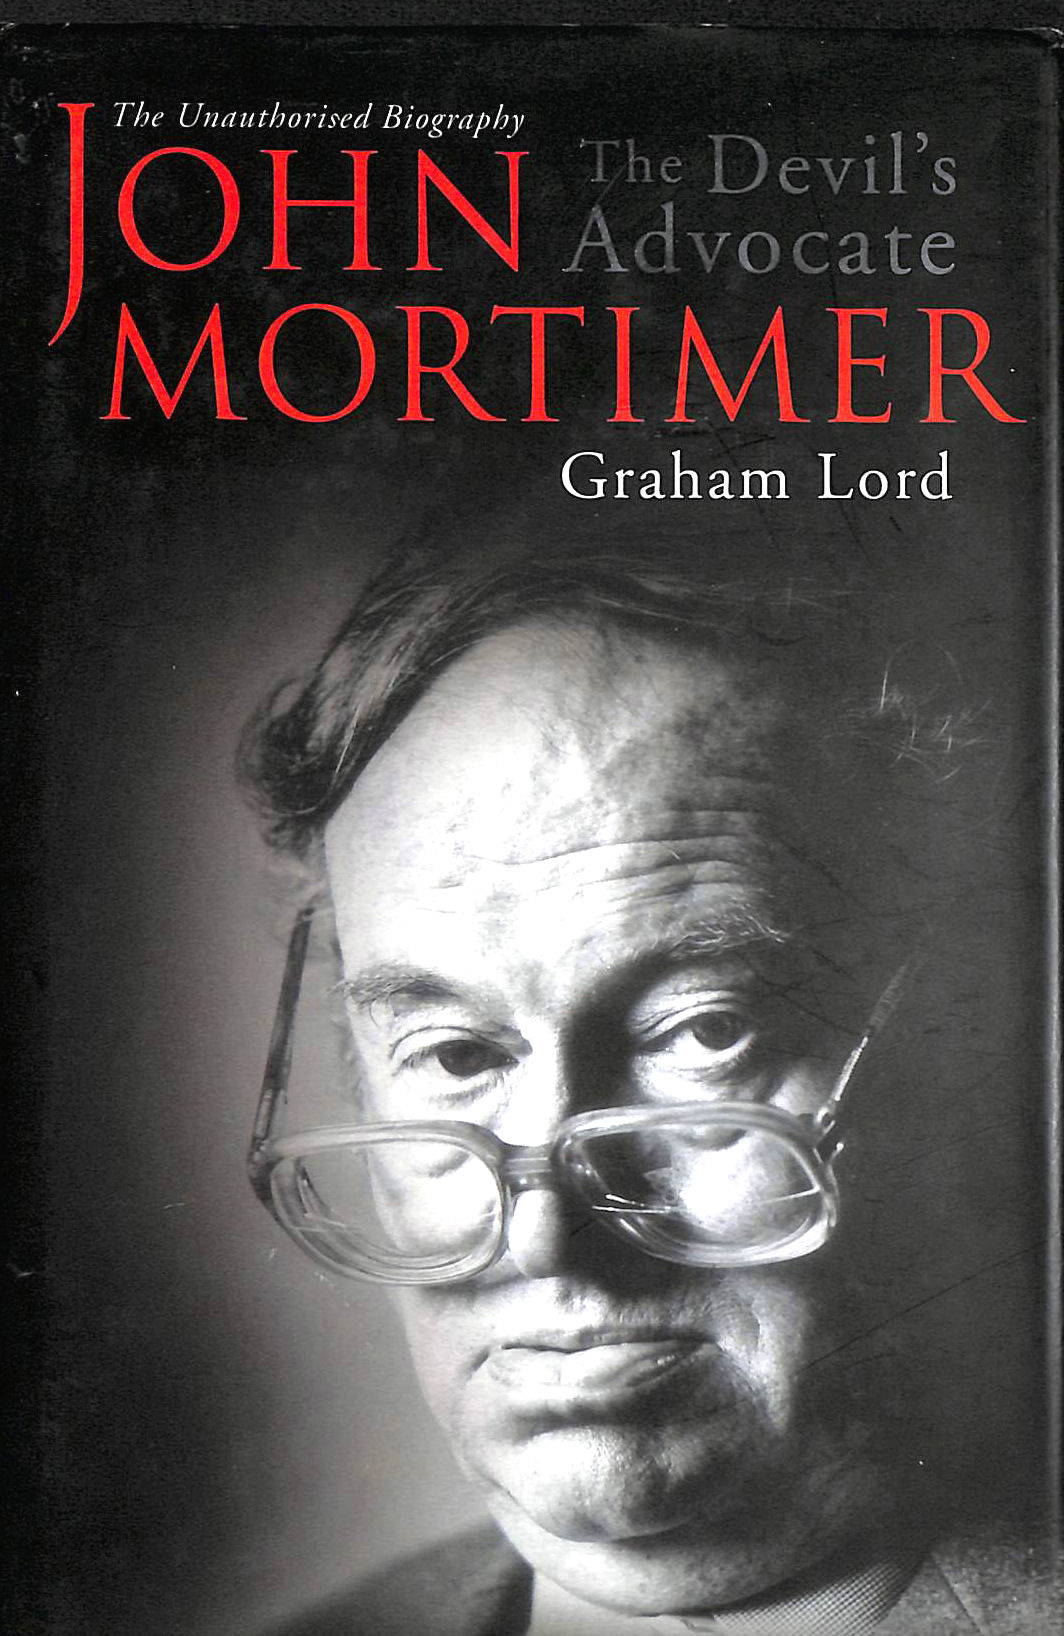 LORD, GRAHAM - John Mortimer: The Devil's Advocate: The Unauthorised Biography